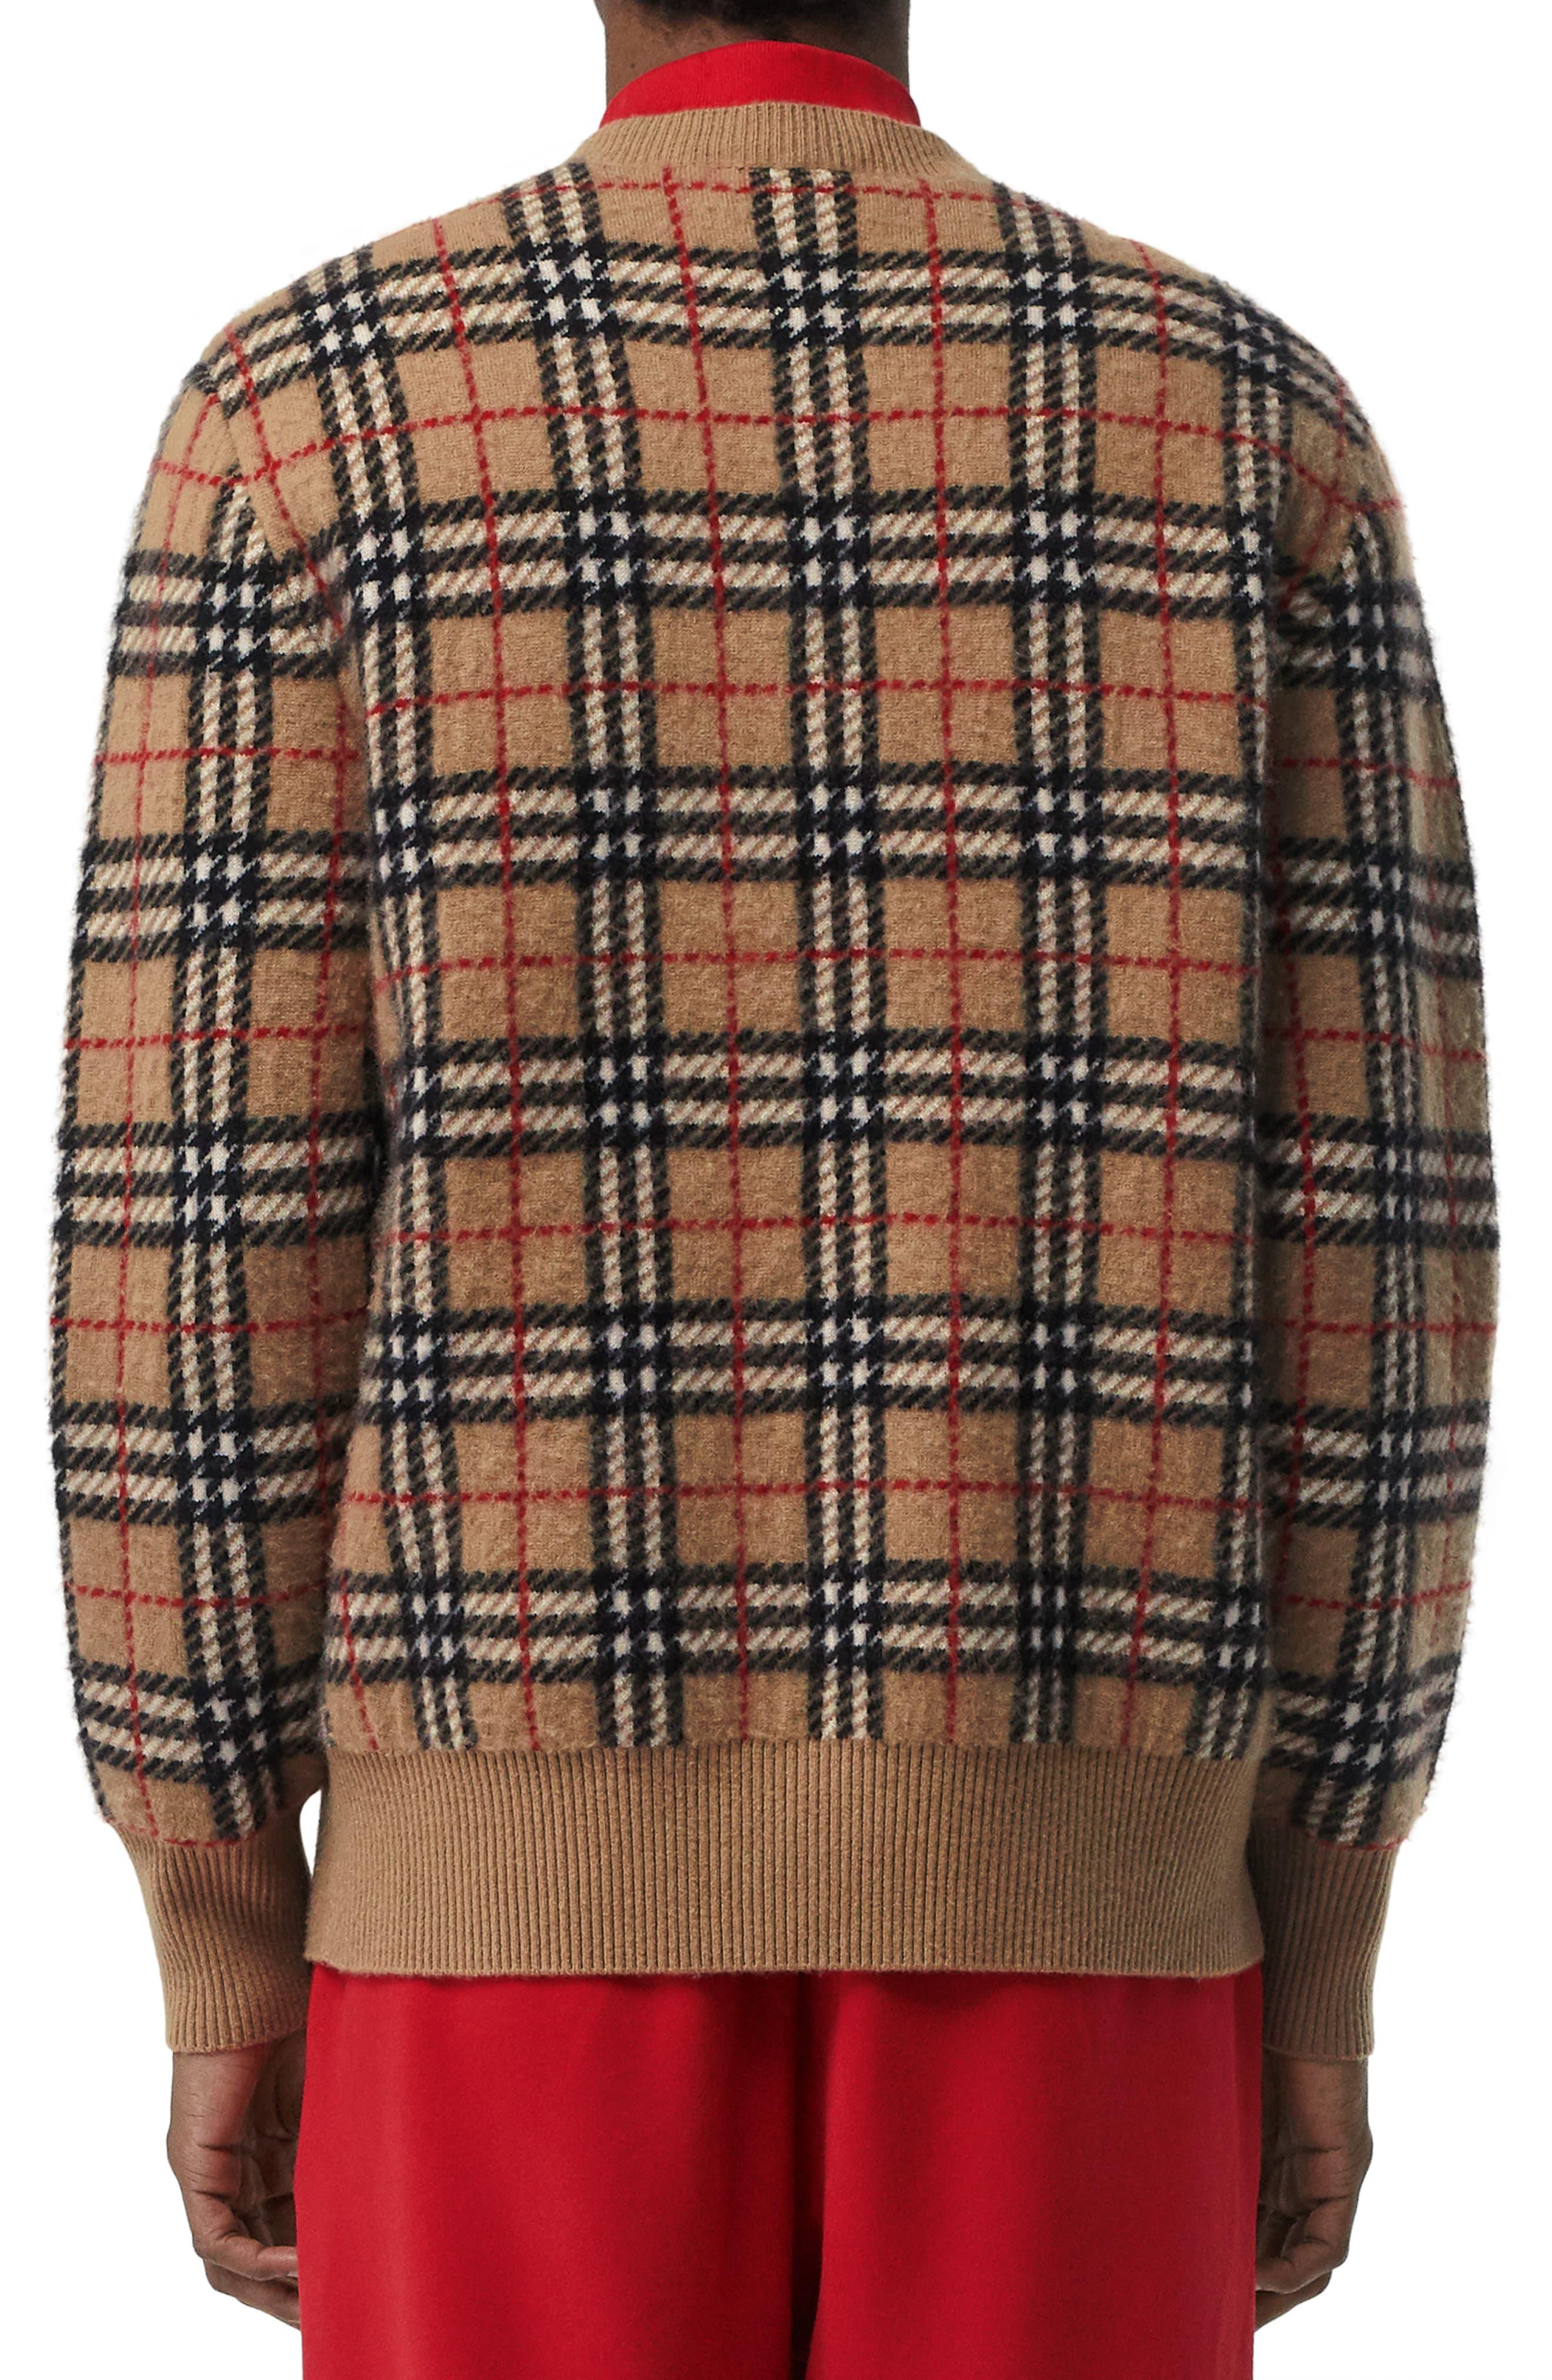 Burberry Banbury Cashmere Sweater in Brown for Men - Lyst